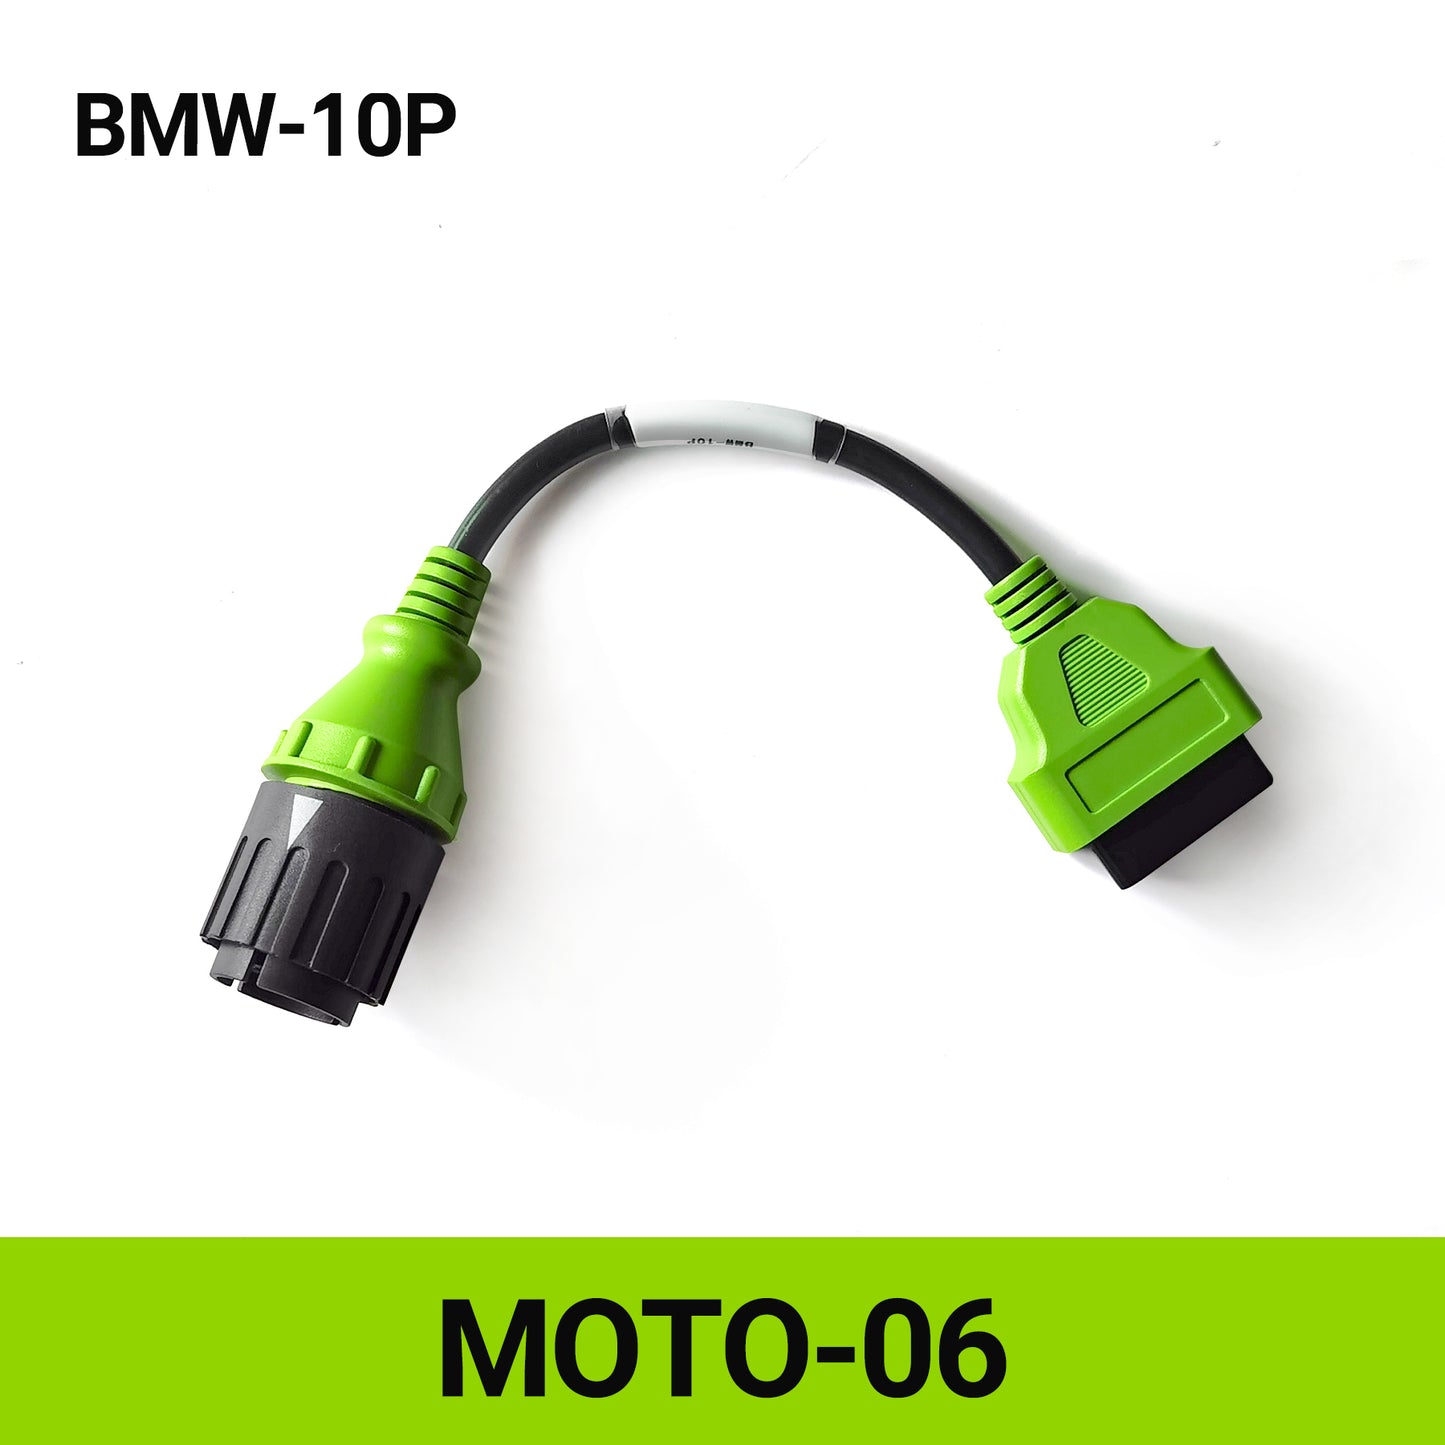 JDiag OBD2 Test Cables, With JDiag M100Pro/M200/M300 Motorcycle Scanner, For BMW-10P, Harley-4P/6P, YAMAHA-3P/4P, HONDA-4P